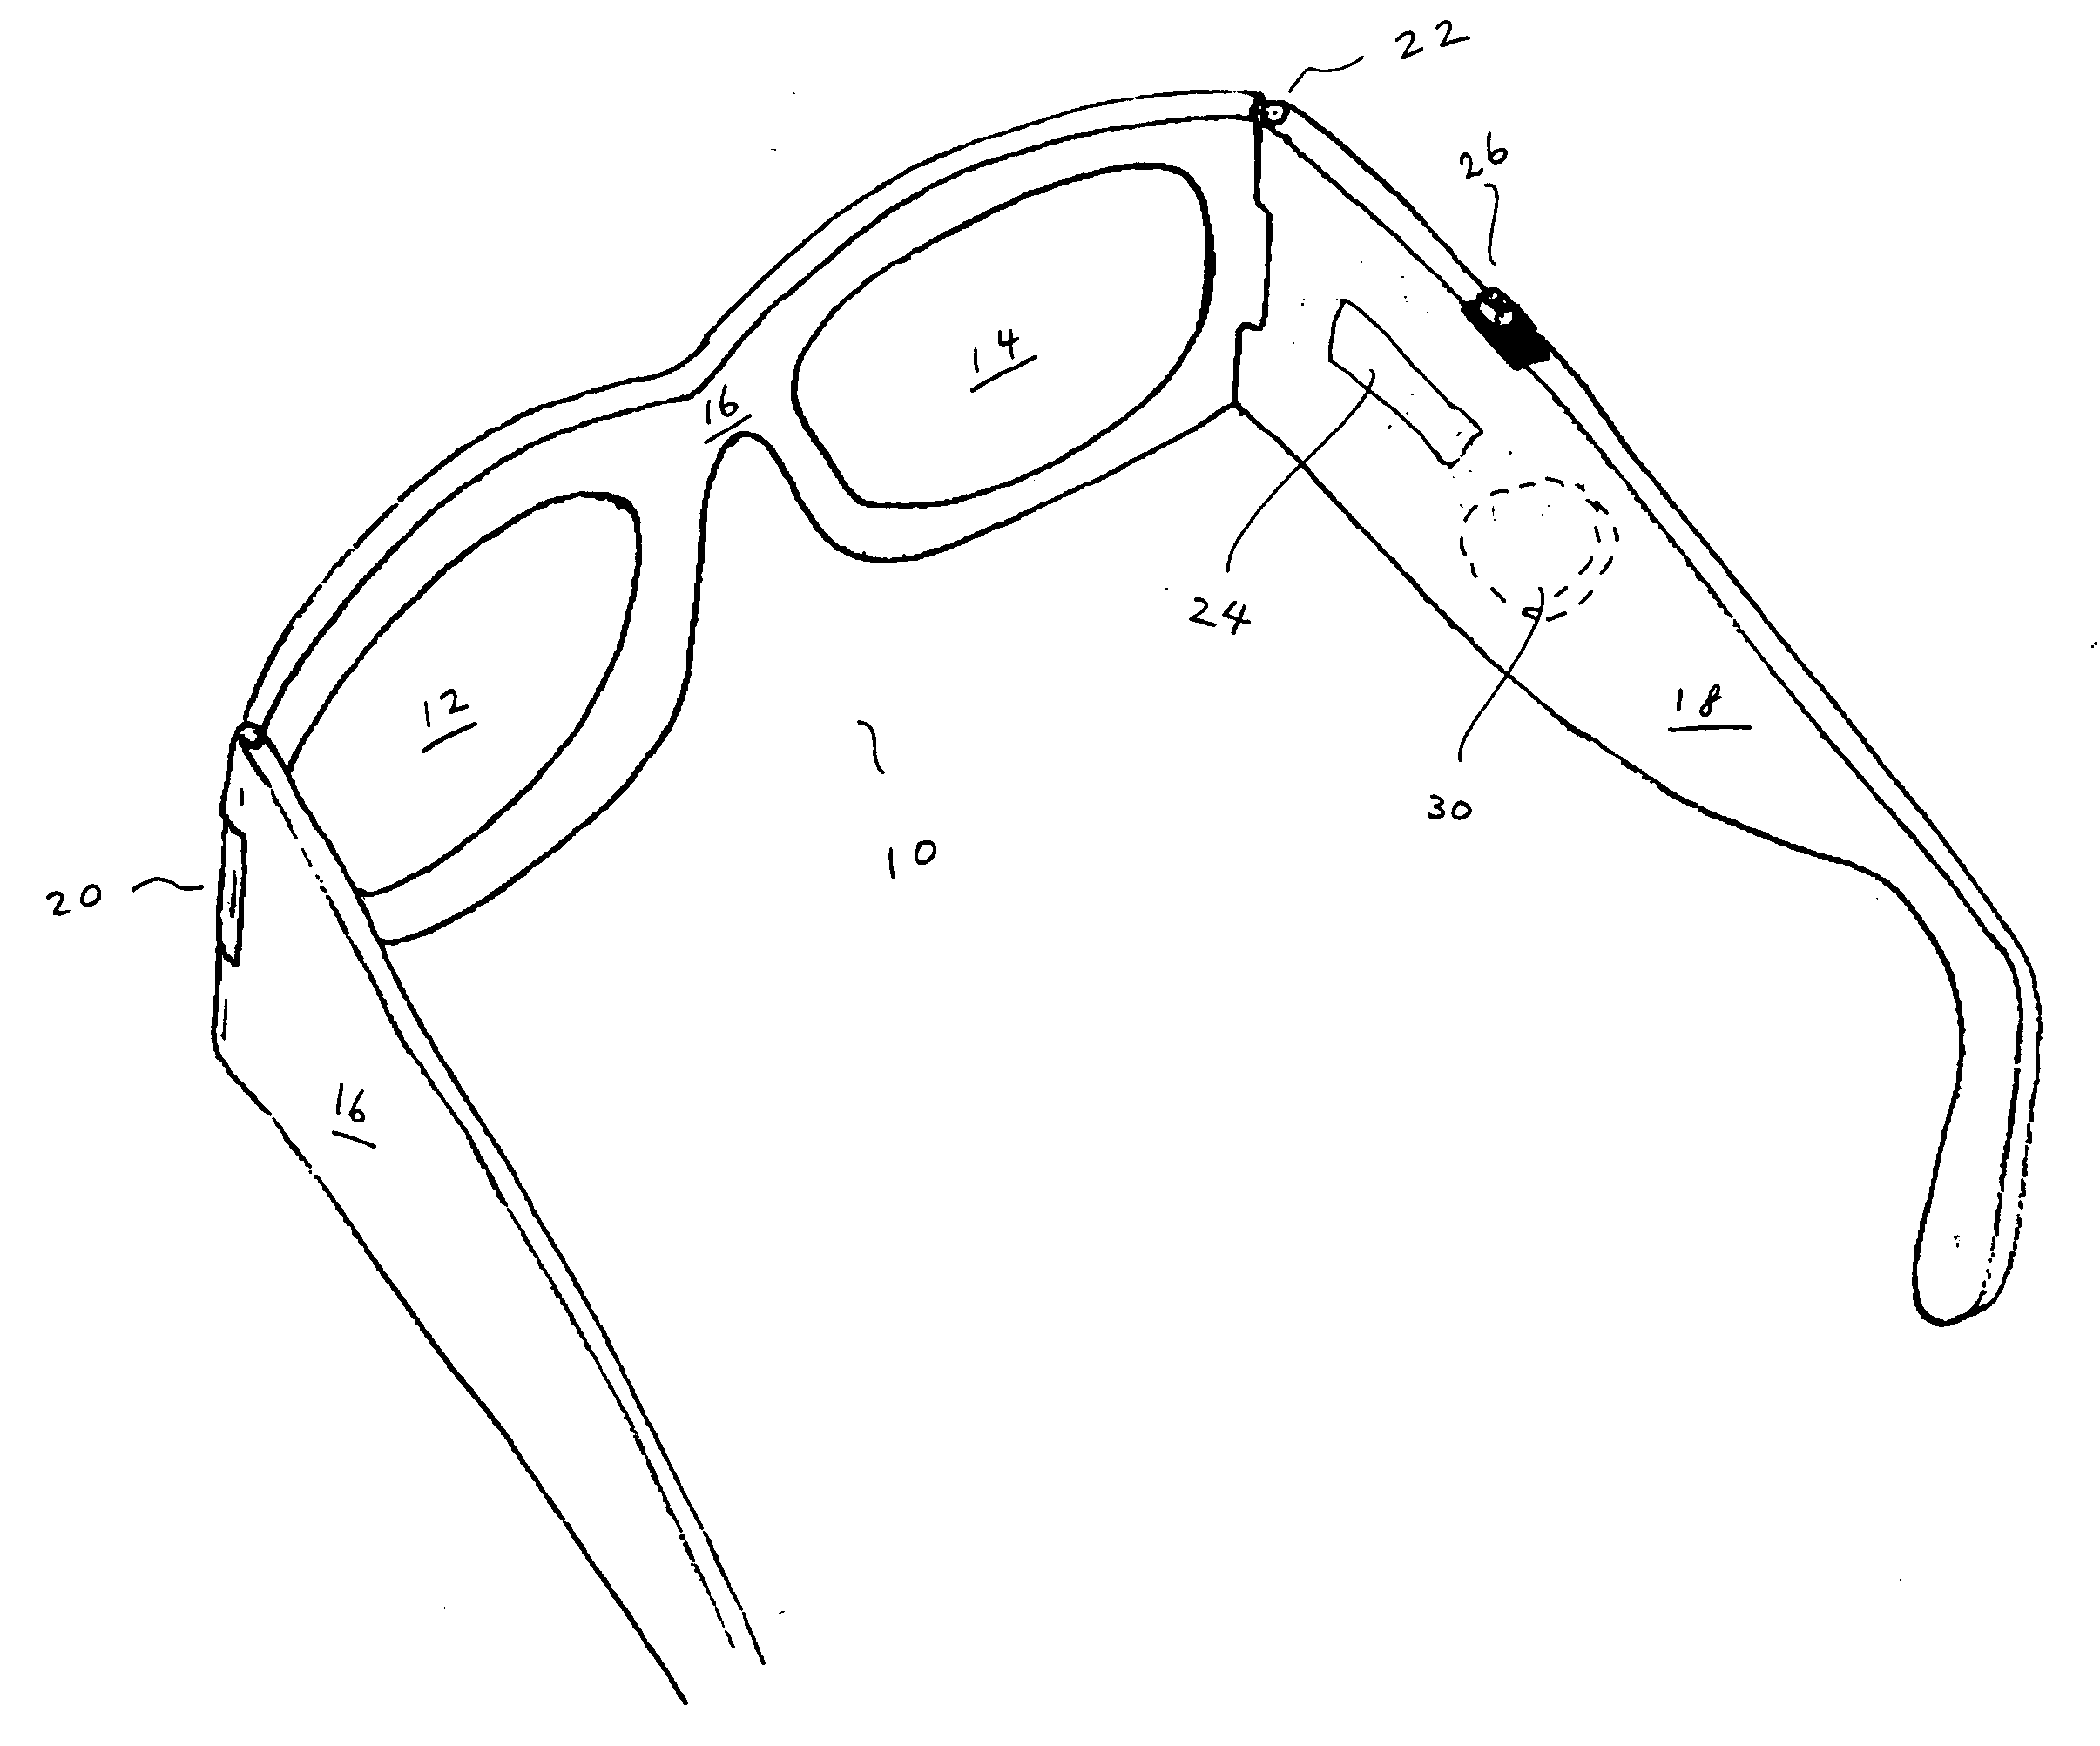 Eyeglasses with a clock or other electrical component